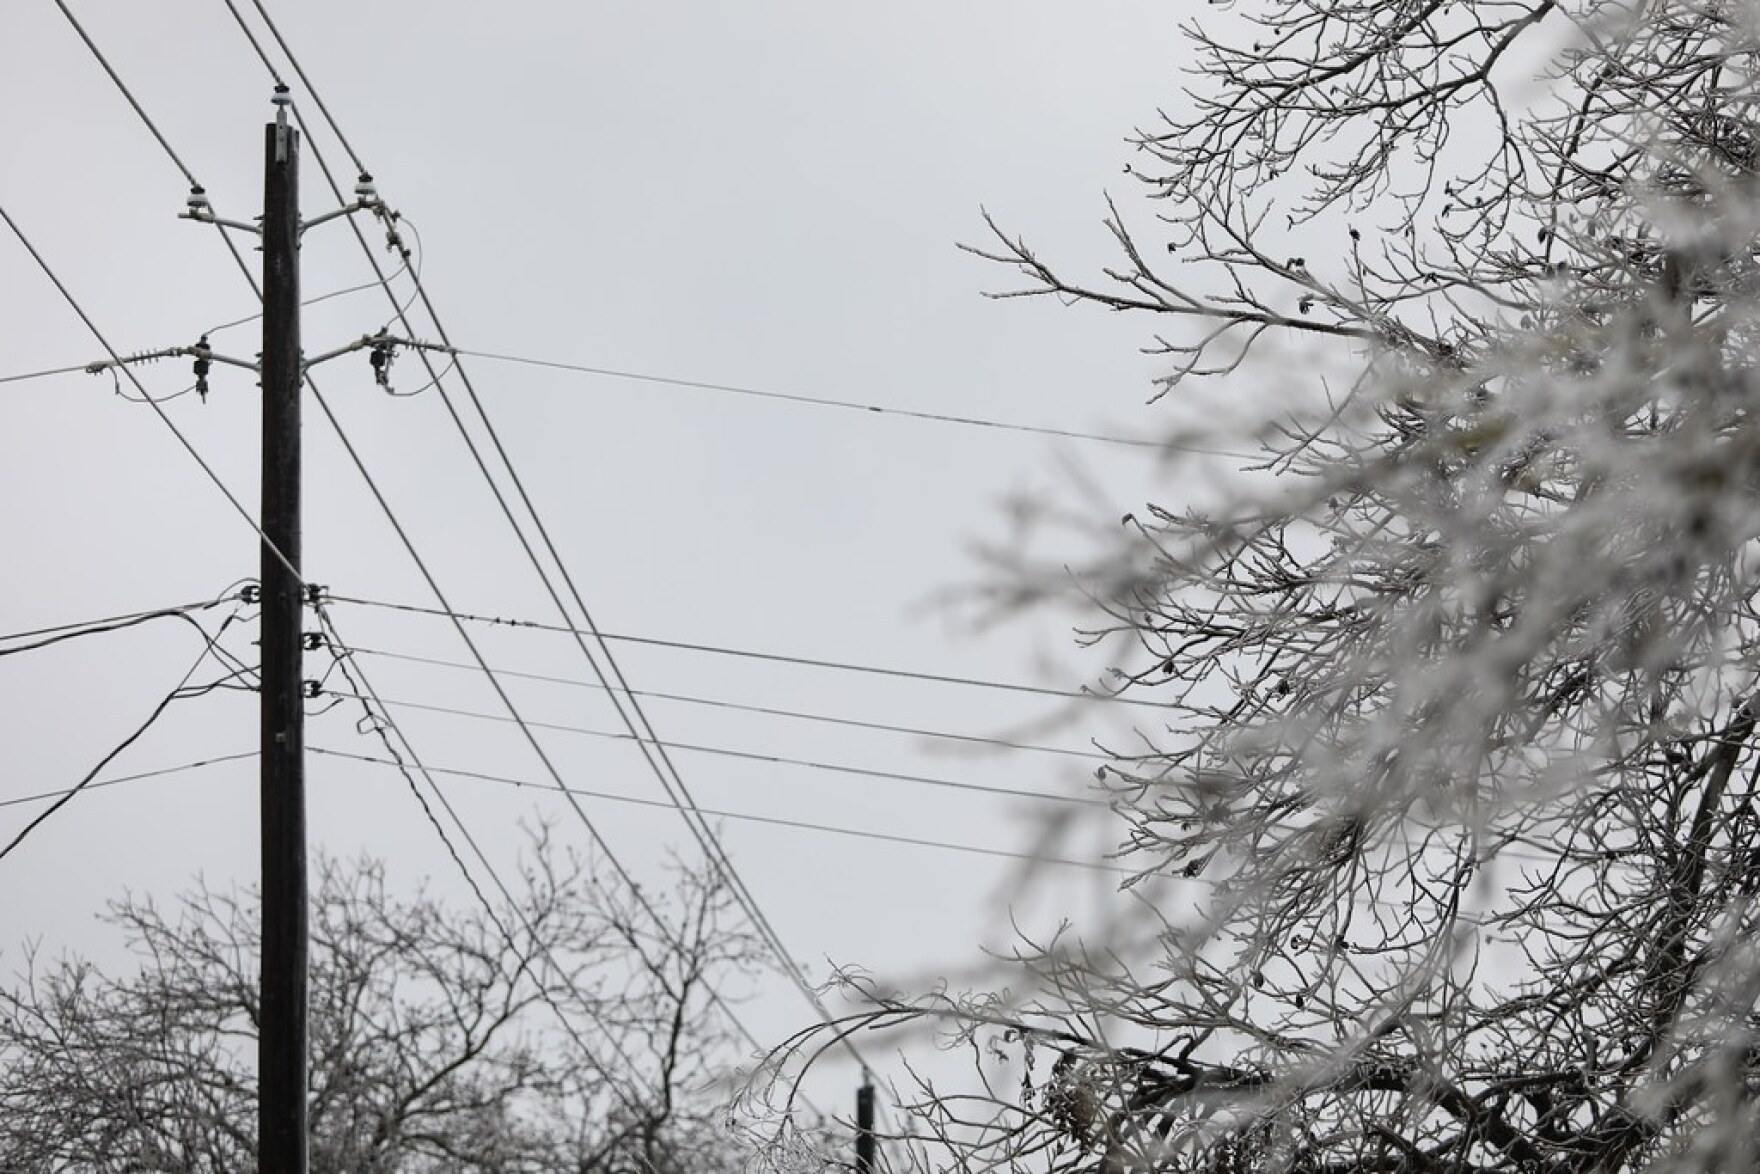 Texas affected by the most major power outages of any state in the U.S.